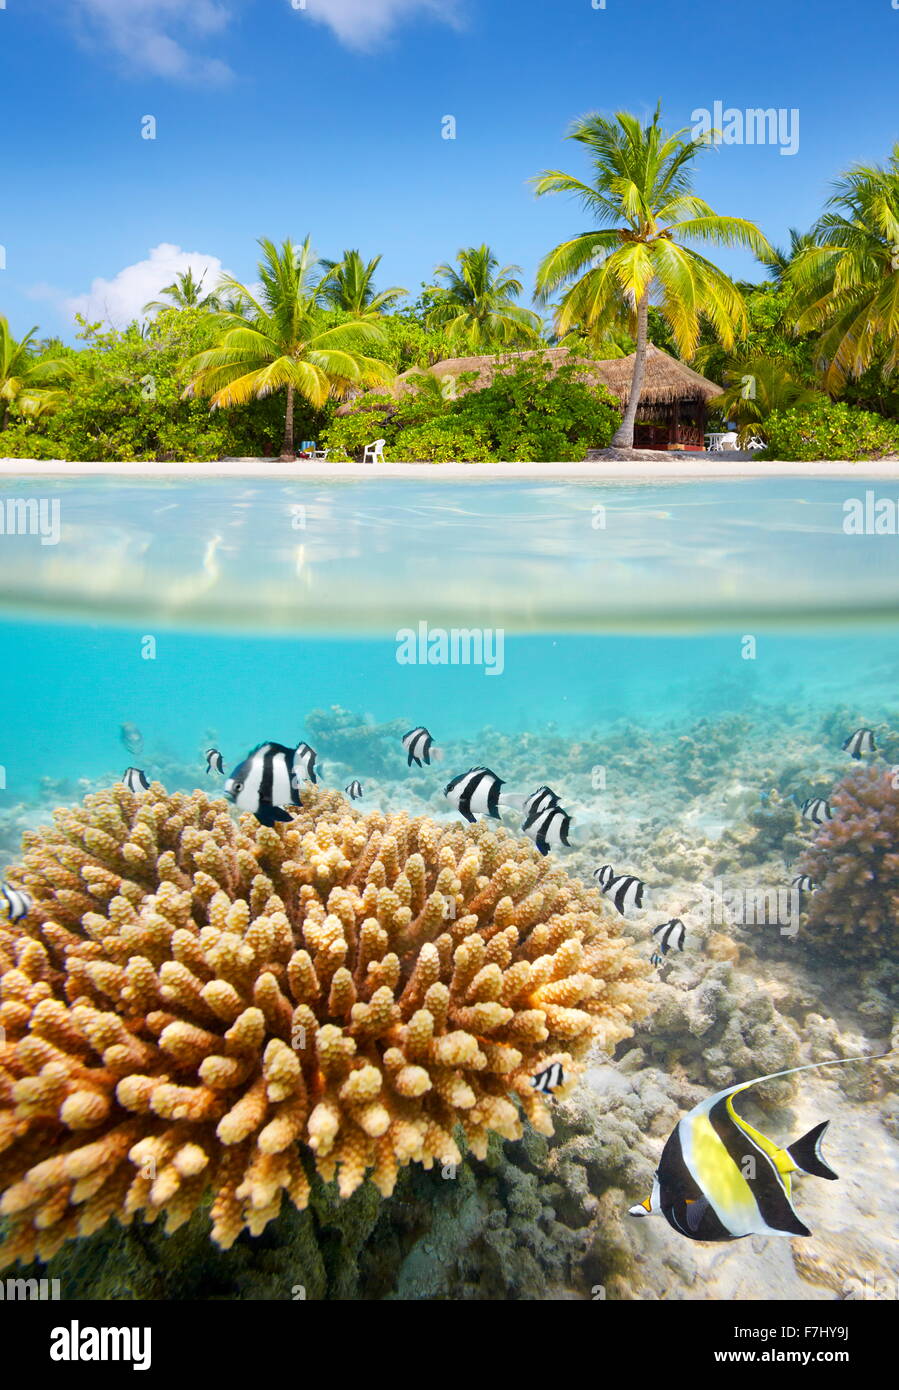 Tropical beach and underwater view with reef and fish, Maldives Island Stock Photo